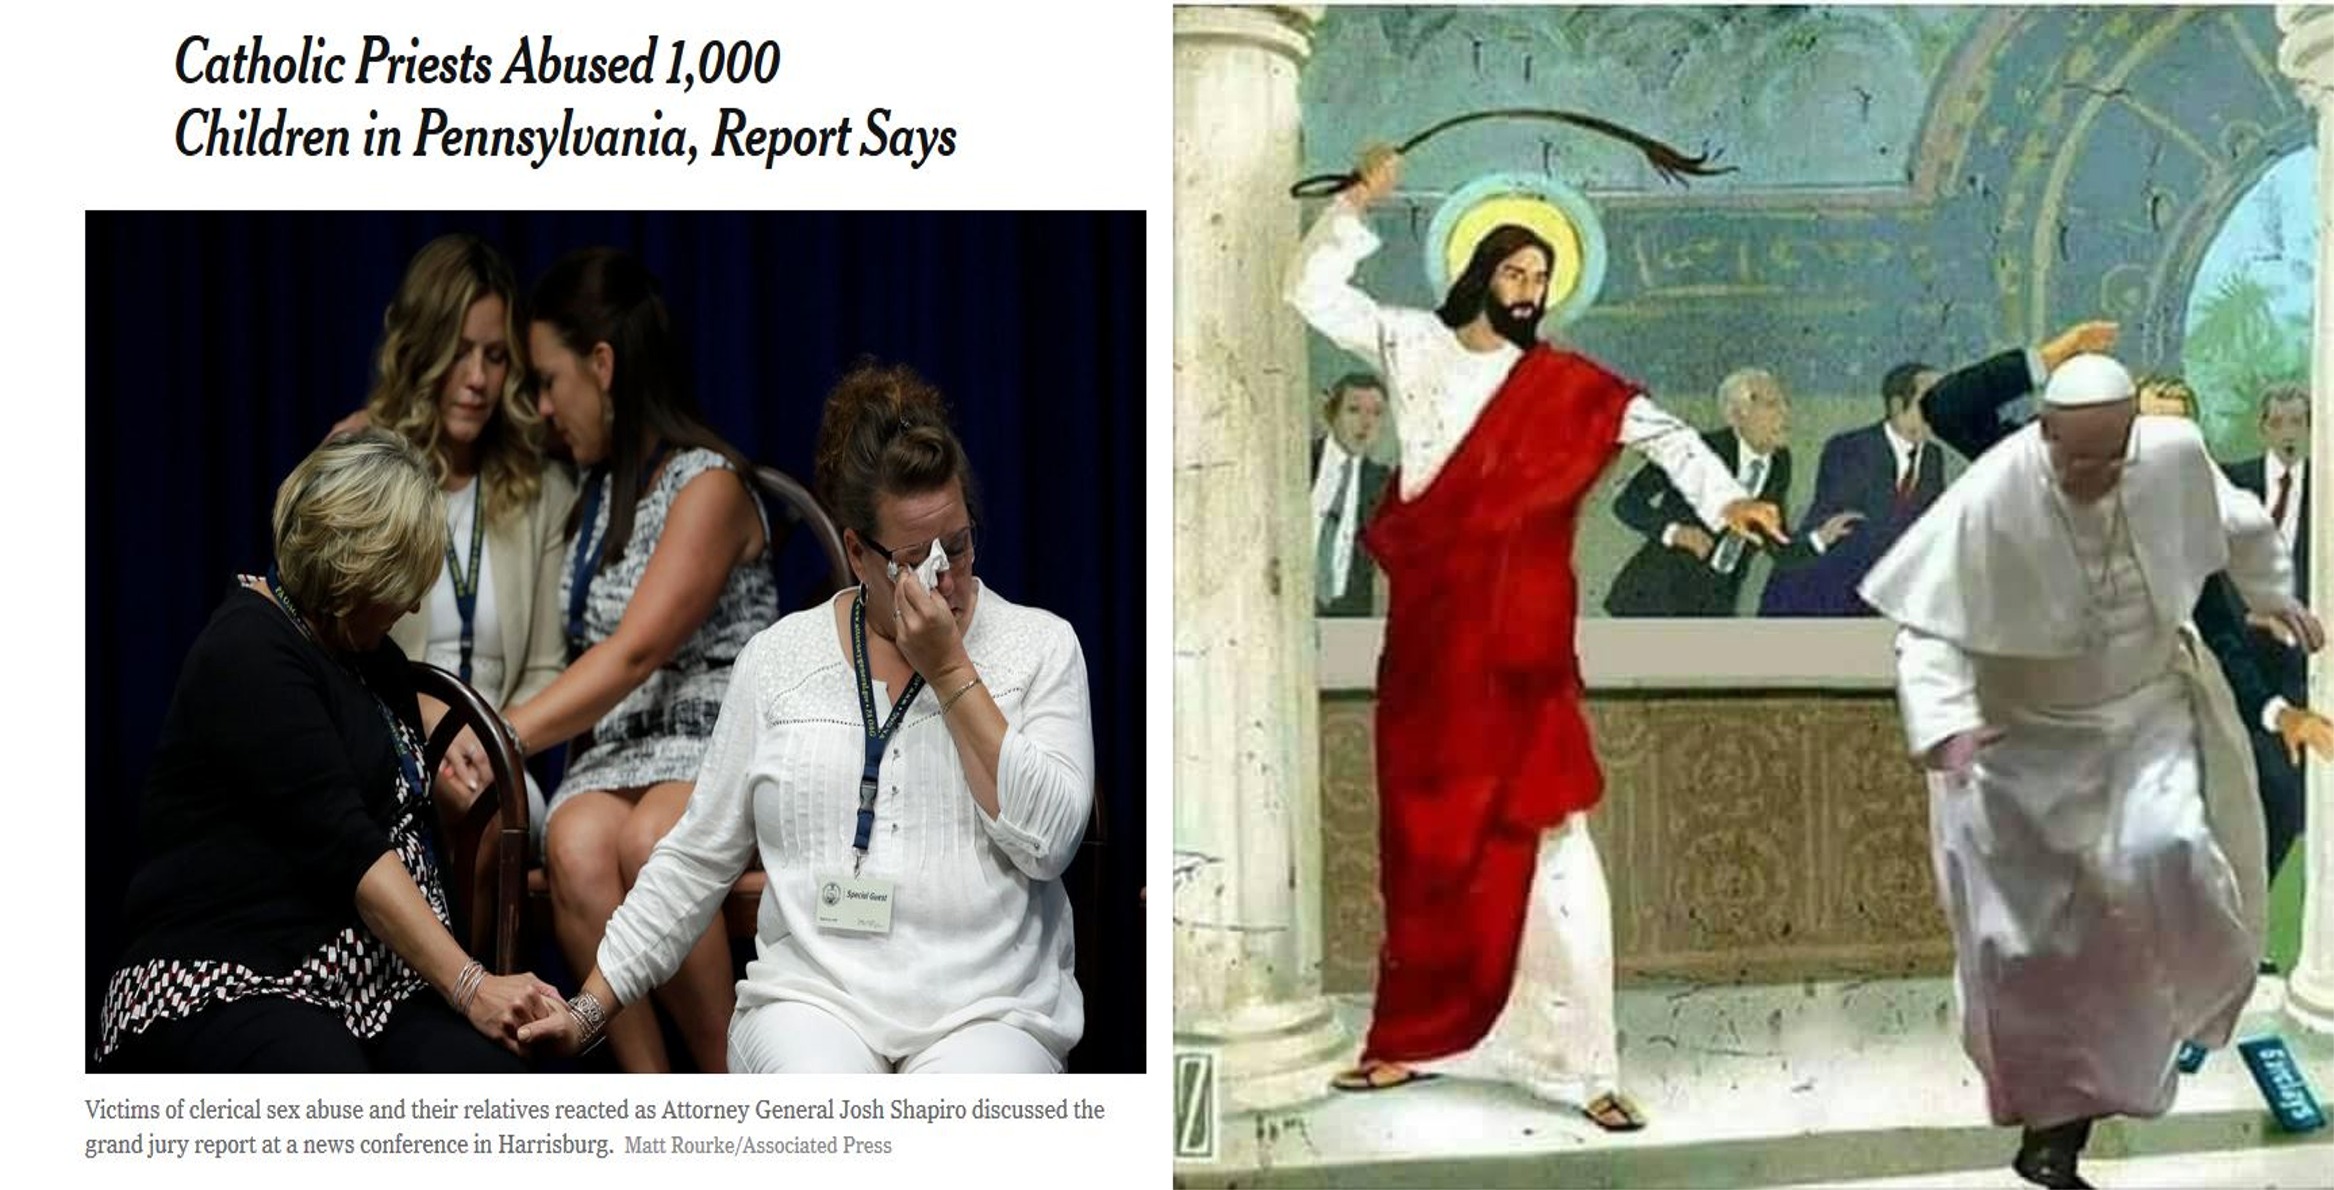 memes -  jesus asking peter do you love me - Catholic Priests Abused 1,000 Children in Pennsylvania, Report Says in Altween Shapiro c he Victime de trand jury report base and the latest s conderence in Harris